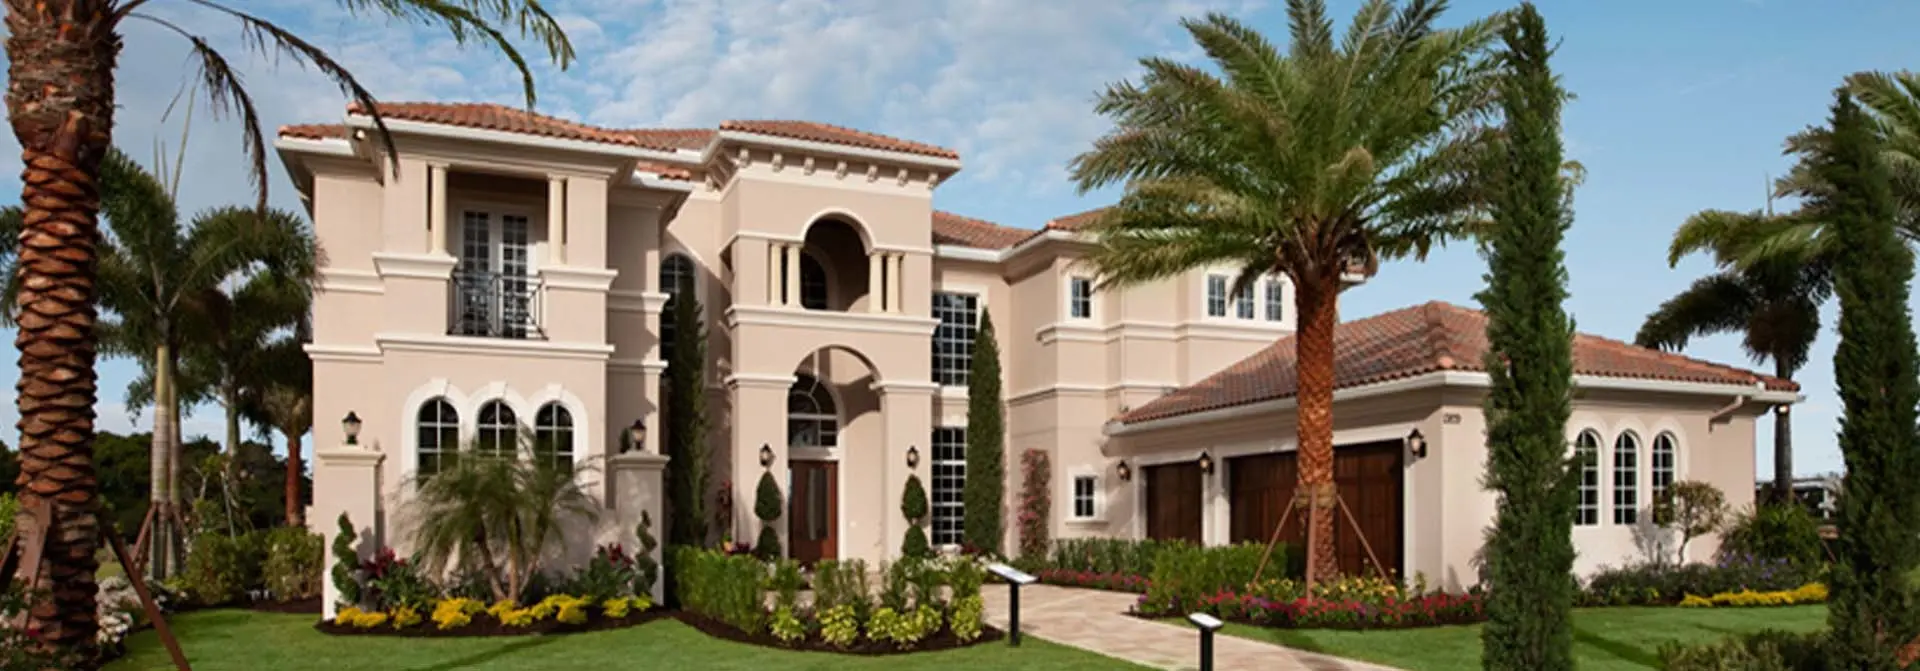 Frenchman's Harbor North Palm Beach | Frenchman's  Harbor Homes for Sale